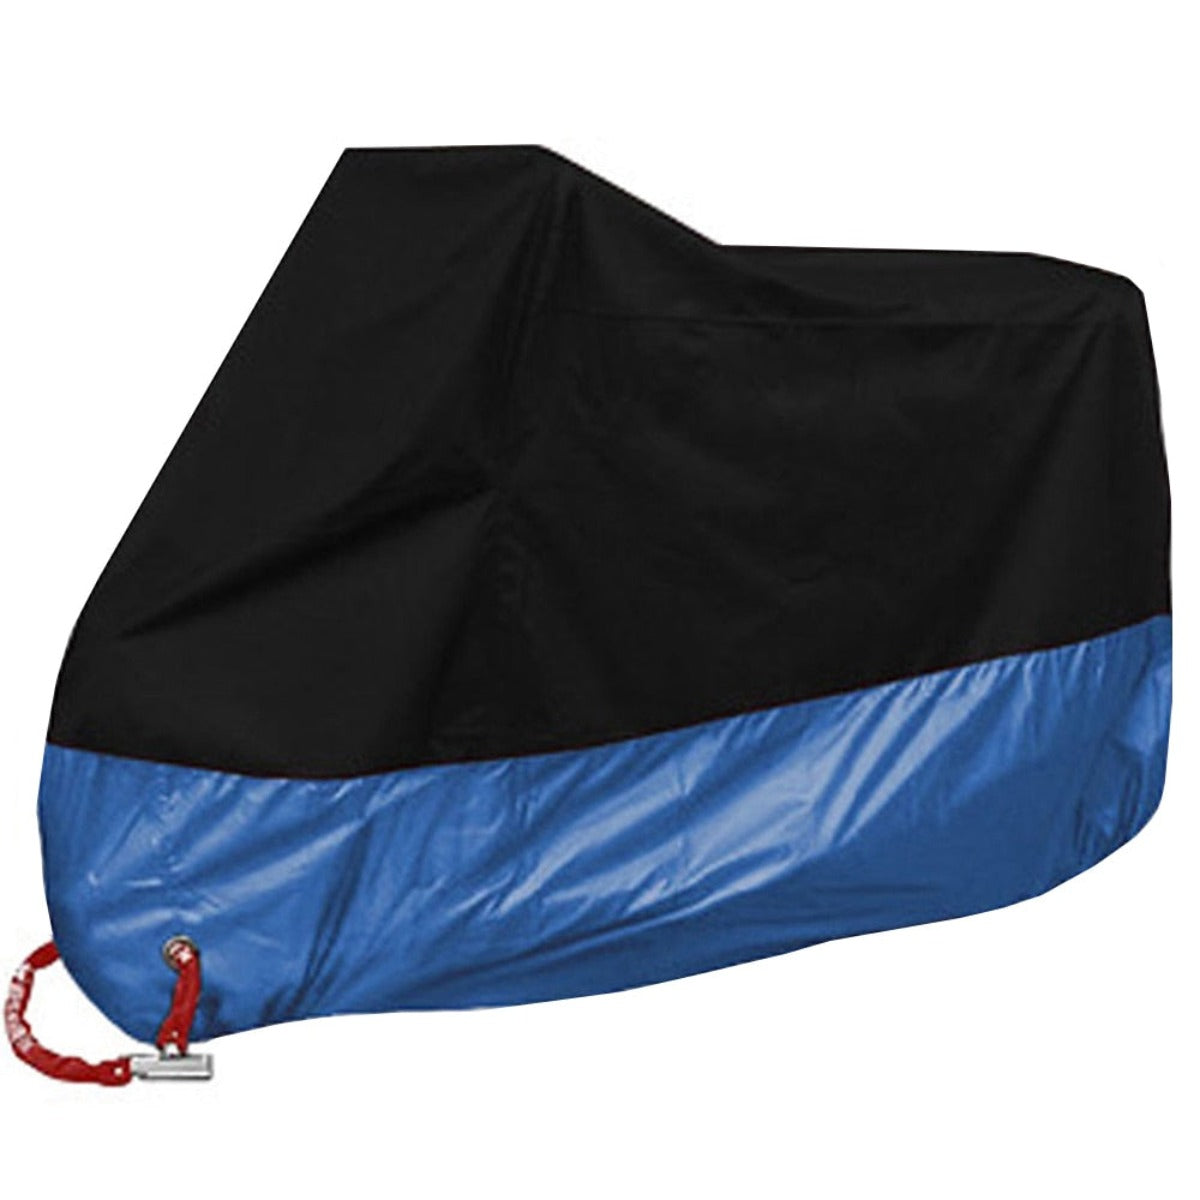 A black and blue Waterproof Protective Motorcycle Cover on a white background, designed to protect against weather damage.